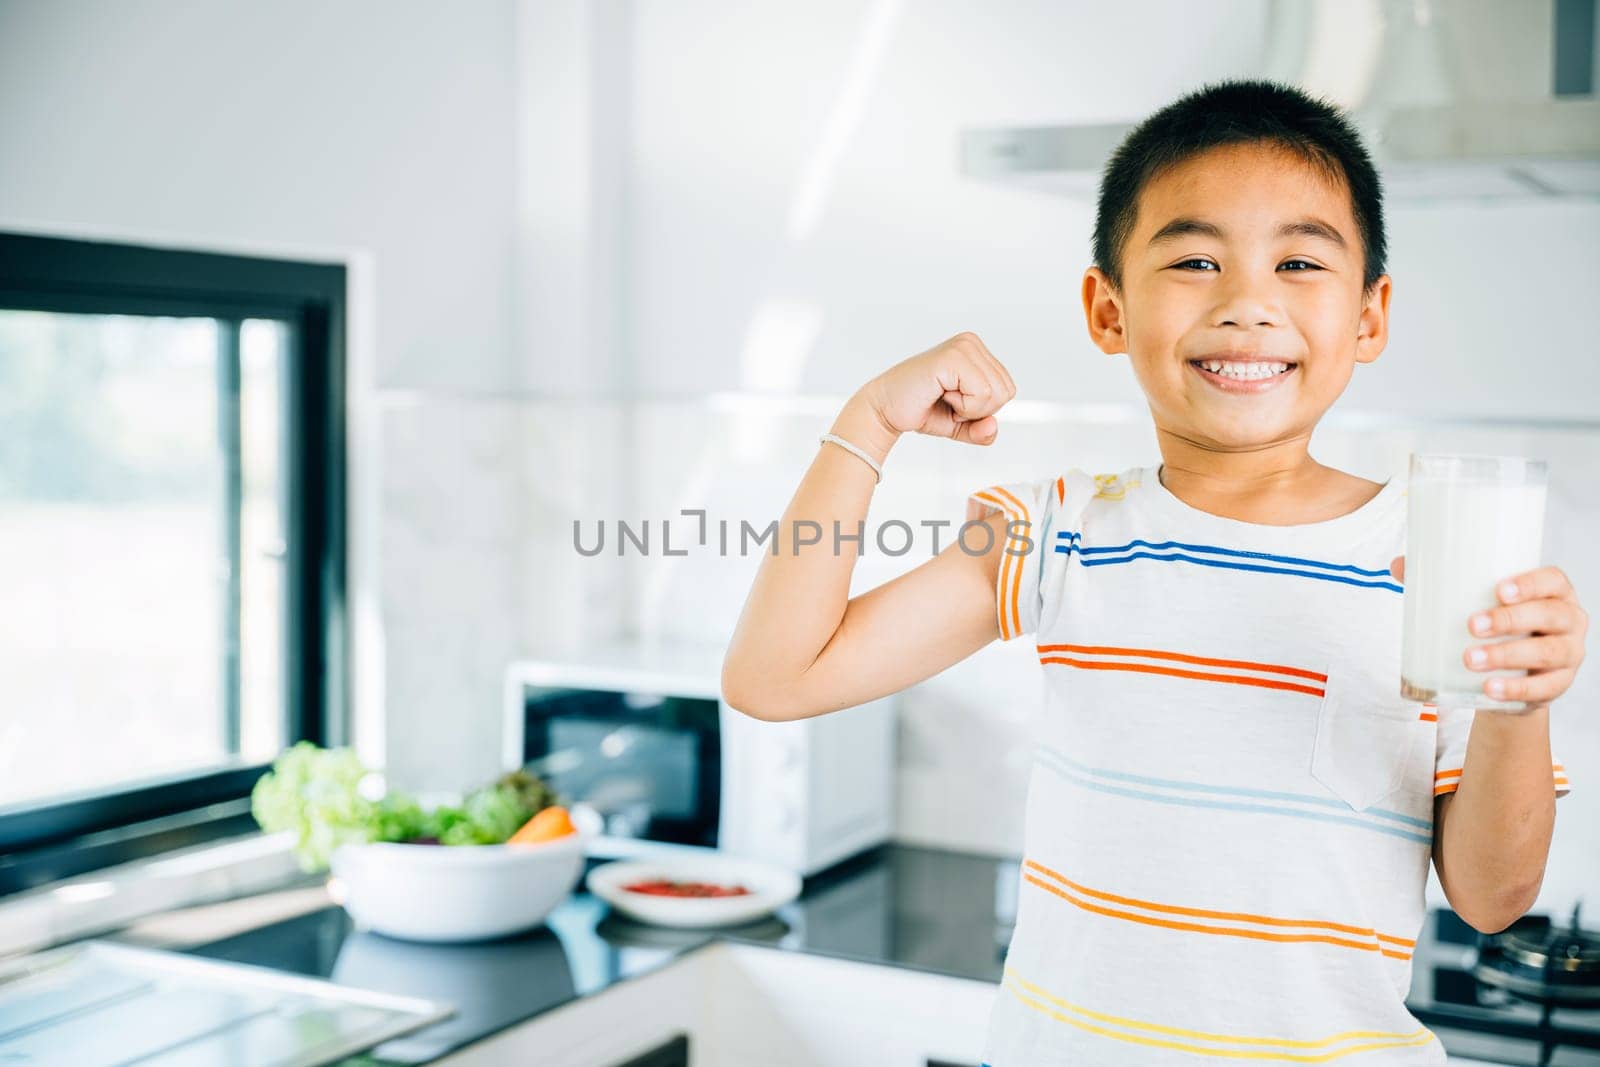 Happy Asian little boy in kitchen holds milk cup, smiling. Portrait of cute son enjoying the drink. Joyful child sips calcium-rich liquid, radiating happiness at home give me.